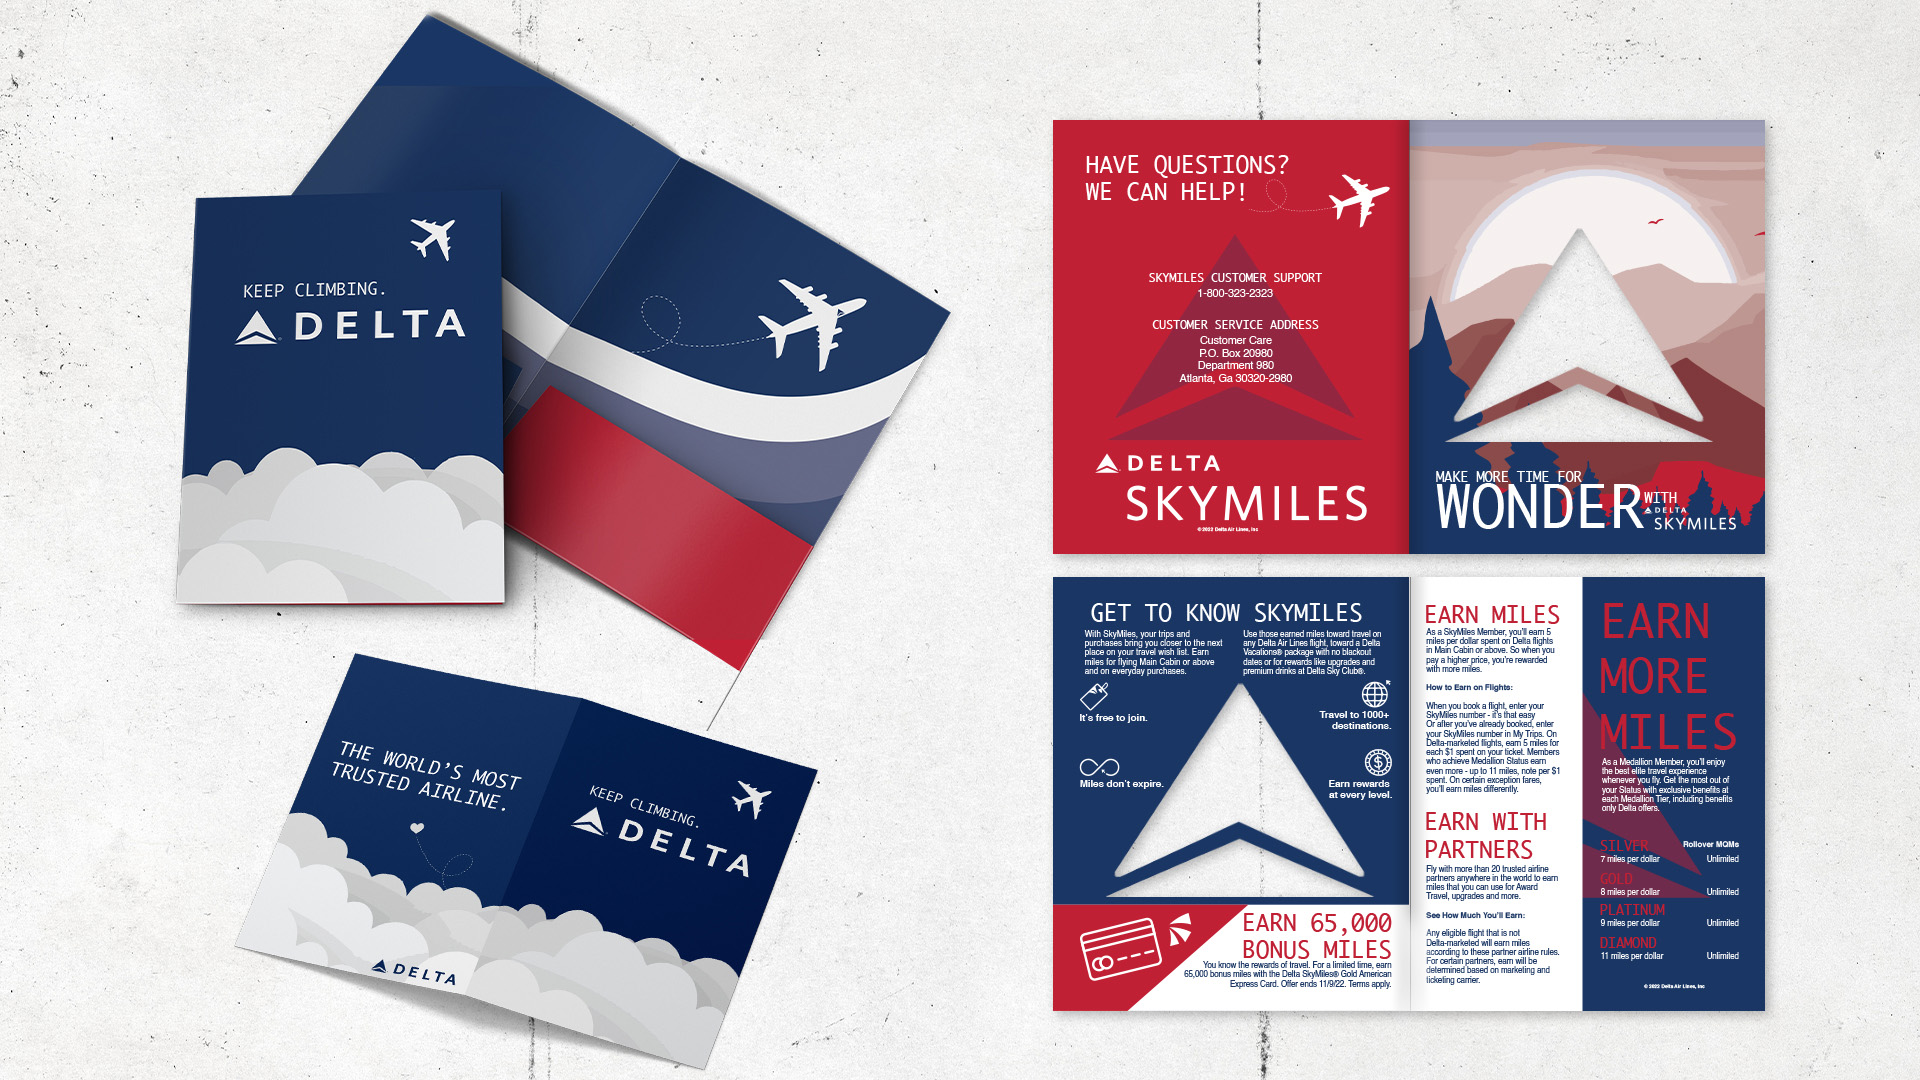 "Delta Folder & Advertisement" / "Delta Folder & Advertisement", promotional folder & pamphlet, 9x12 (folder) & 5x6 (pamphlet) printed, 2022. This folder & pamphlet duo are a promotional project duo intended to be passed out to customers of Delta Airlines.